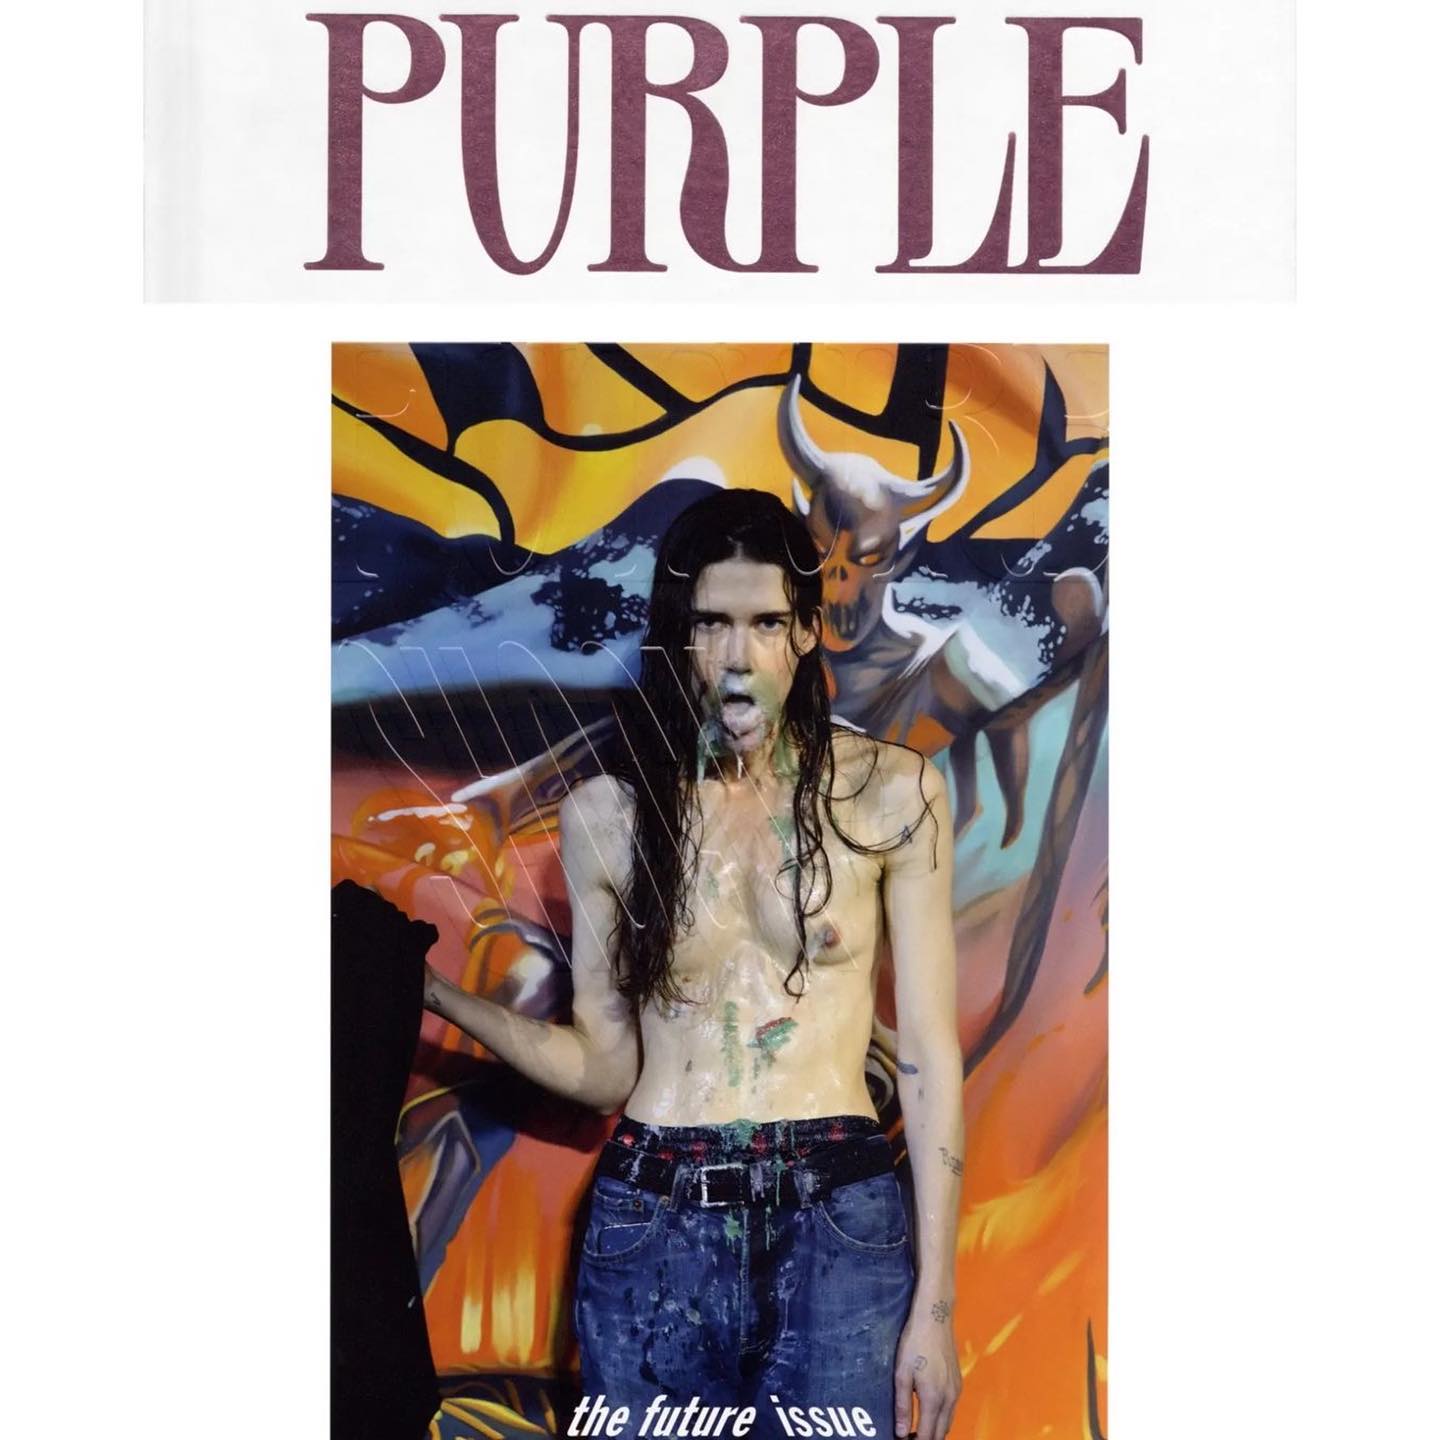 Eliza (@elizad0uglas ) on the cover of Purple Magazine shot at Anne Imhof’s exhibition „Natures Mortes“ at Palais du Tokyo. Photography by Nadine Fraczkowski, styling by Laetitia Gimenez, hair by Michael Delmas, make-up performances by Thierry Do Nascimento.